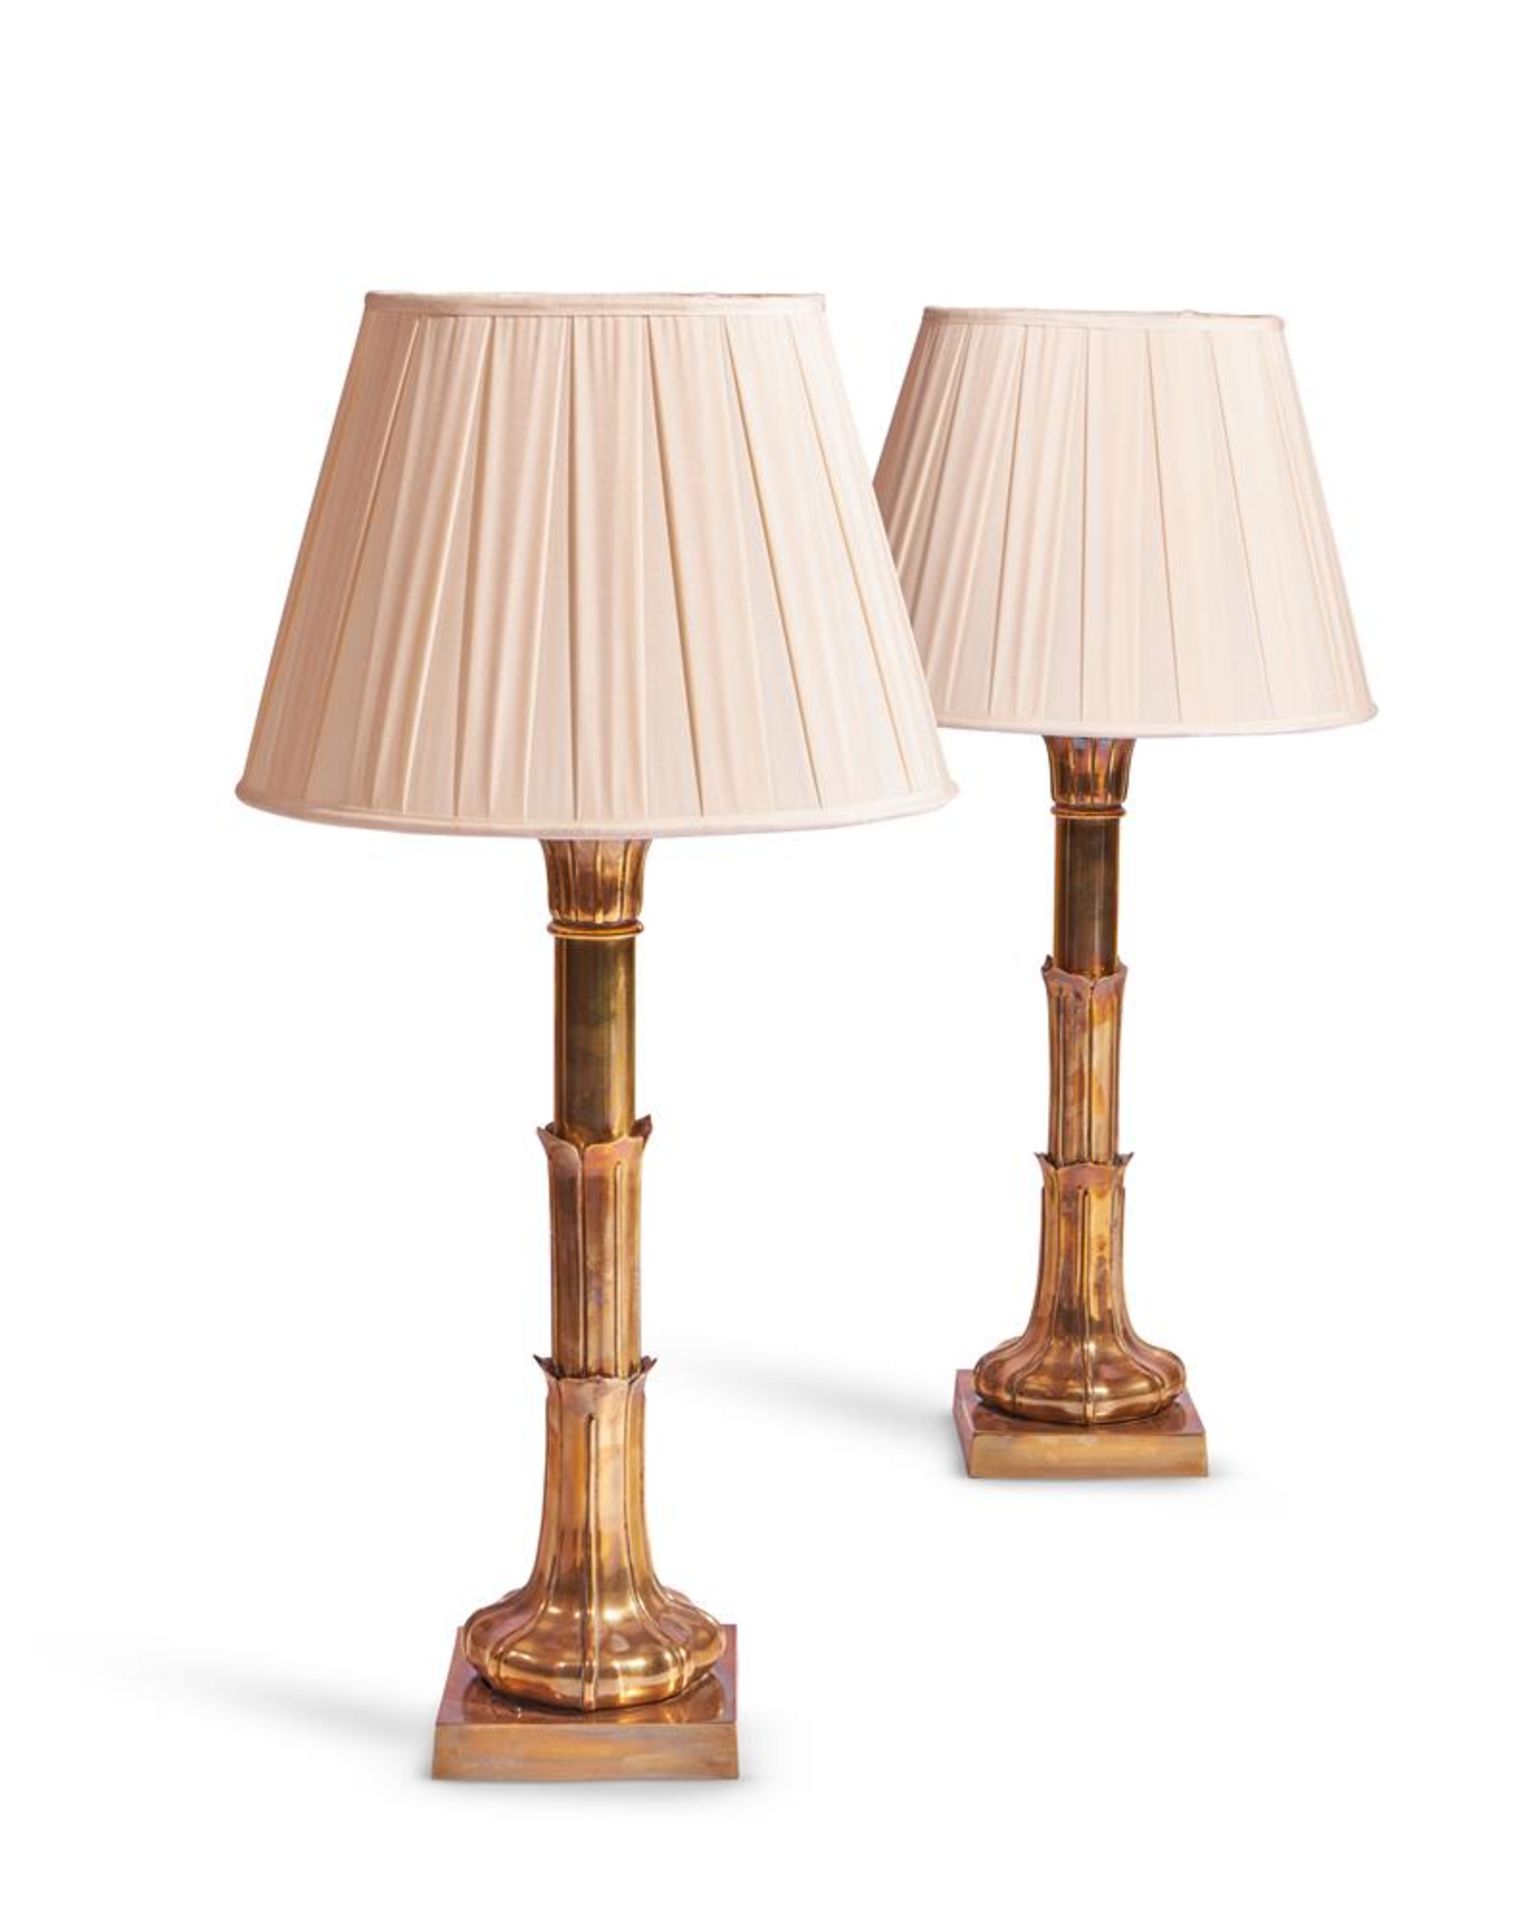 A PAIR OF WILLIAM IV STYLE GILT BRASS LAMPS, MODERN - Image 2 of 2